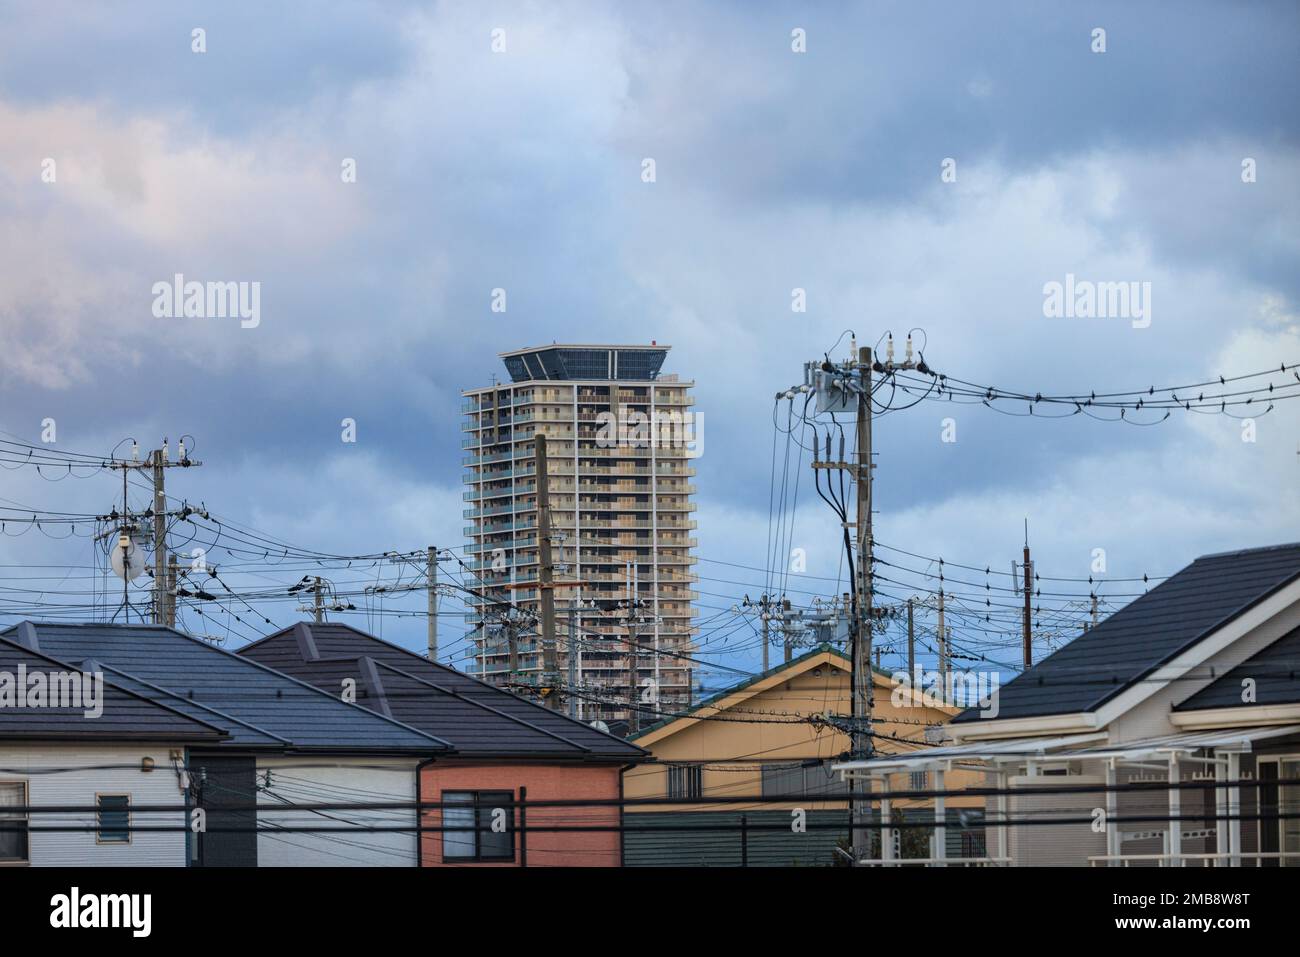 High rise apartment tower over electrical wires and suburban houses Stock Photo